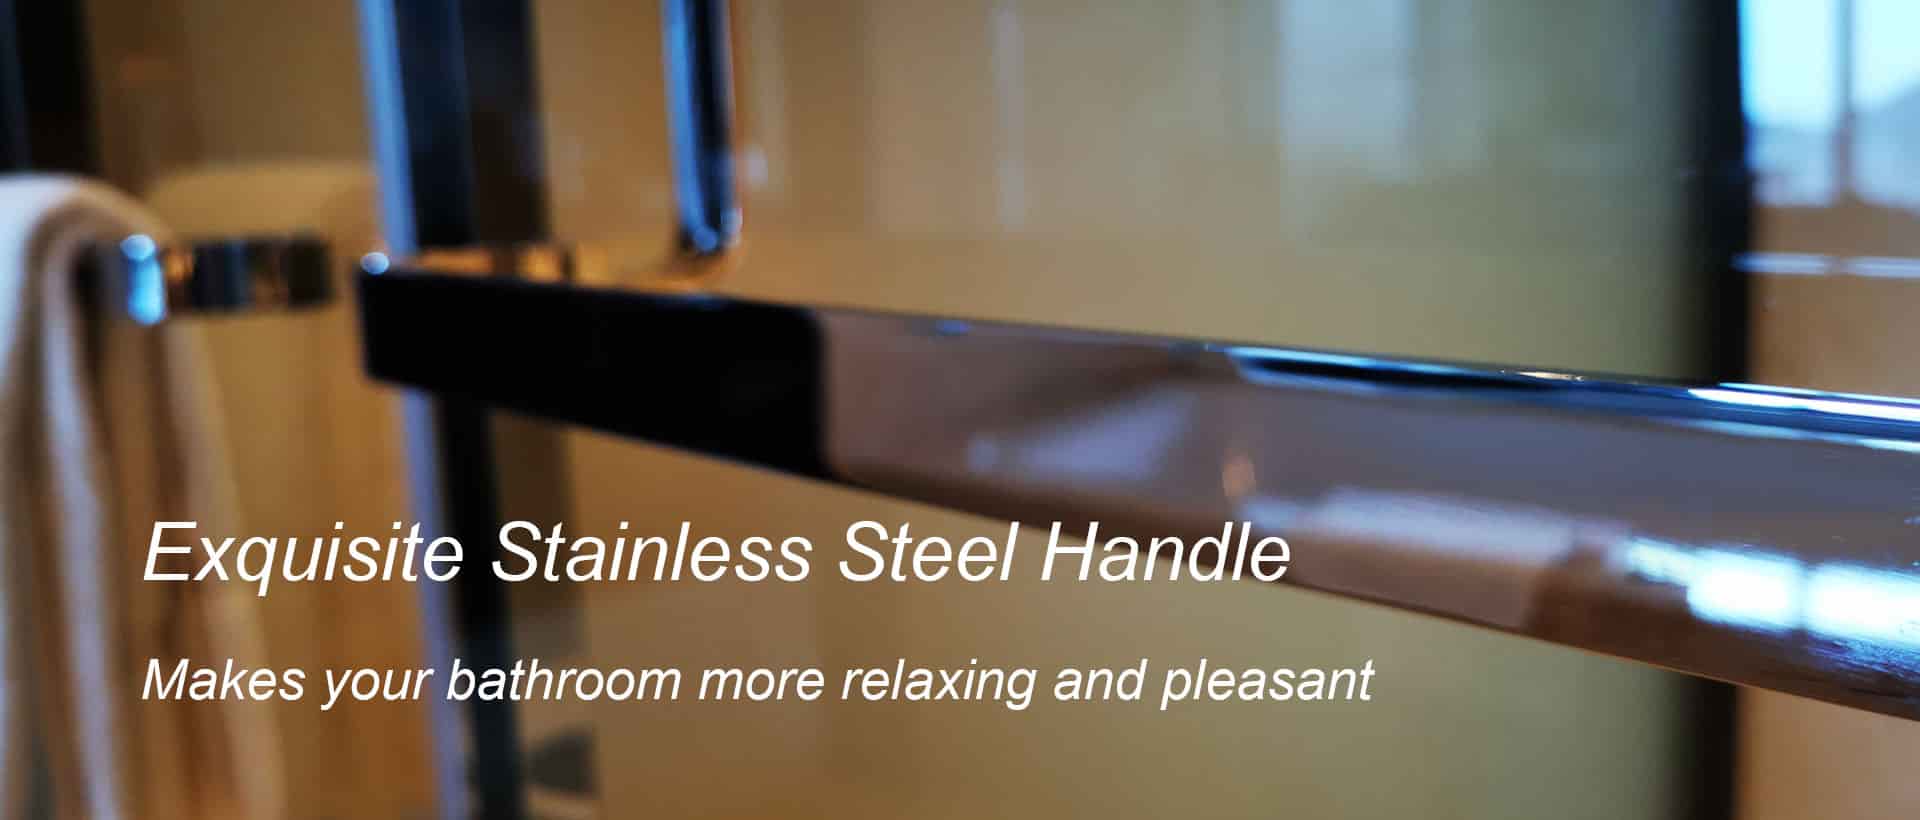 Exquisite Stainless Steel Handle